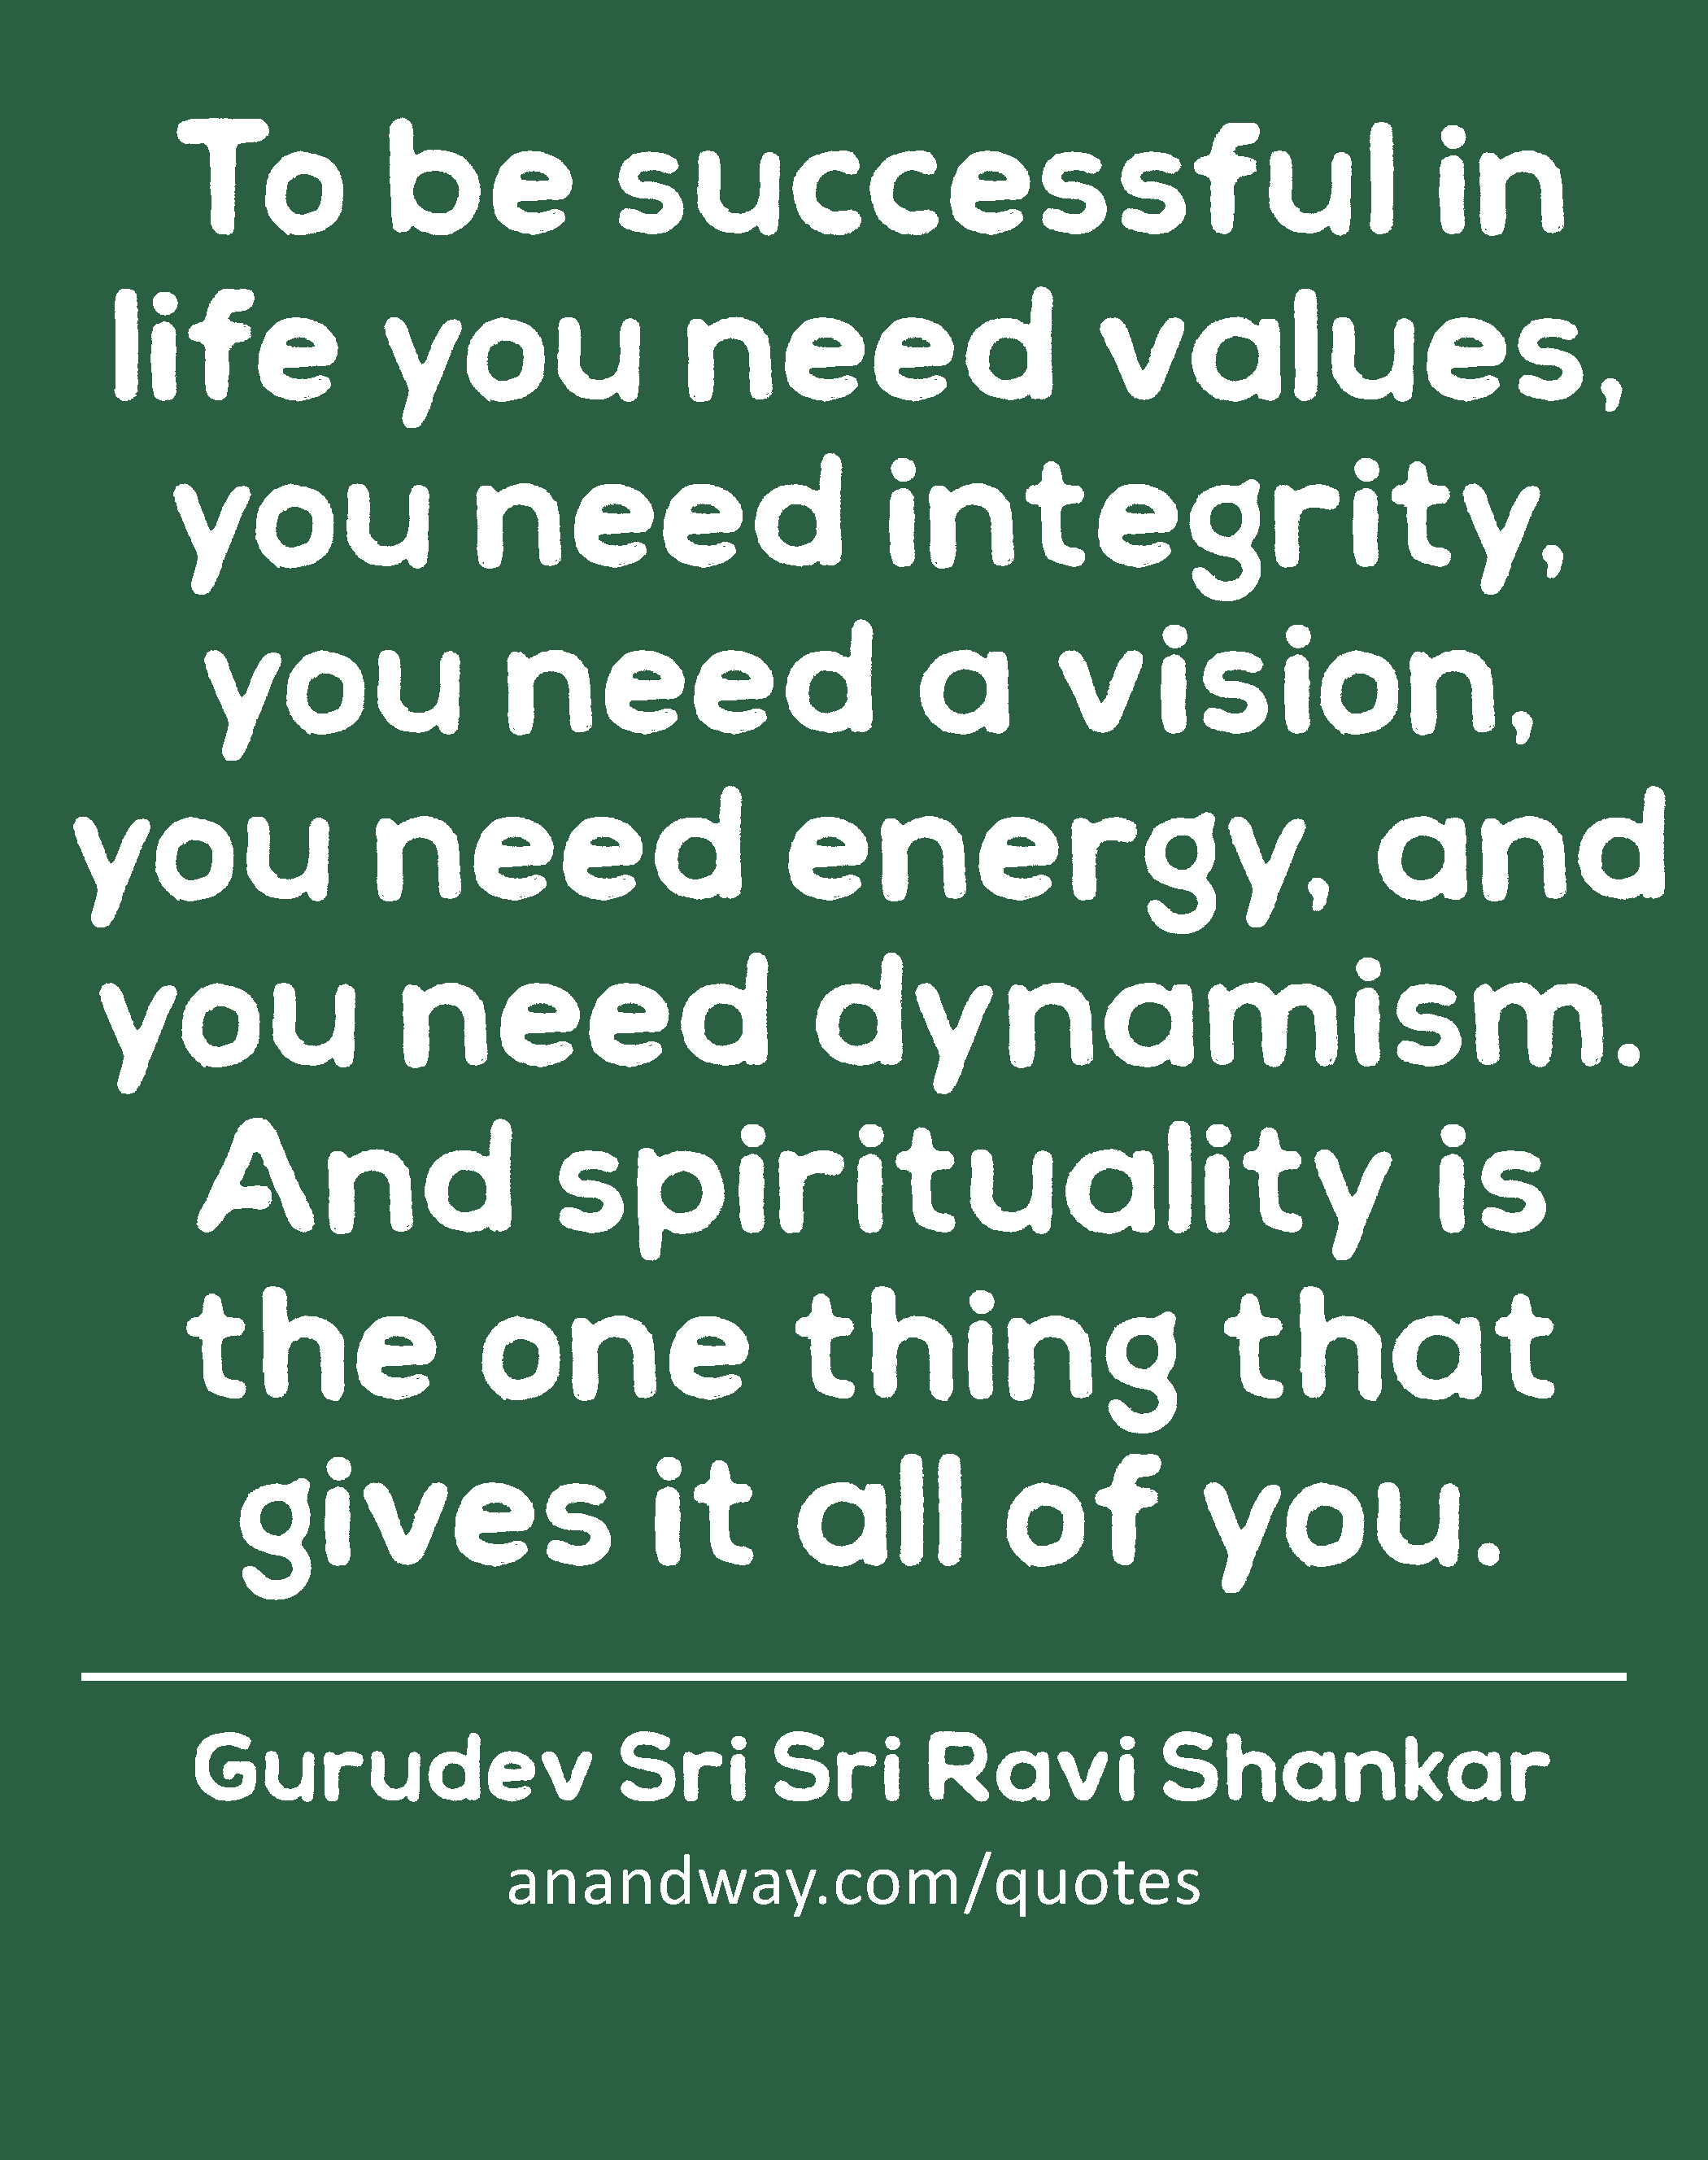 To be successful in life you need values, you need integrity, you need a vision, you need energy,
 -Gurudev Sri Sri Ravi Shankar